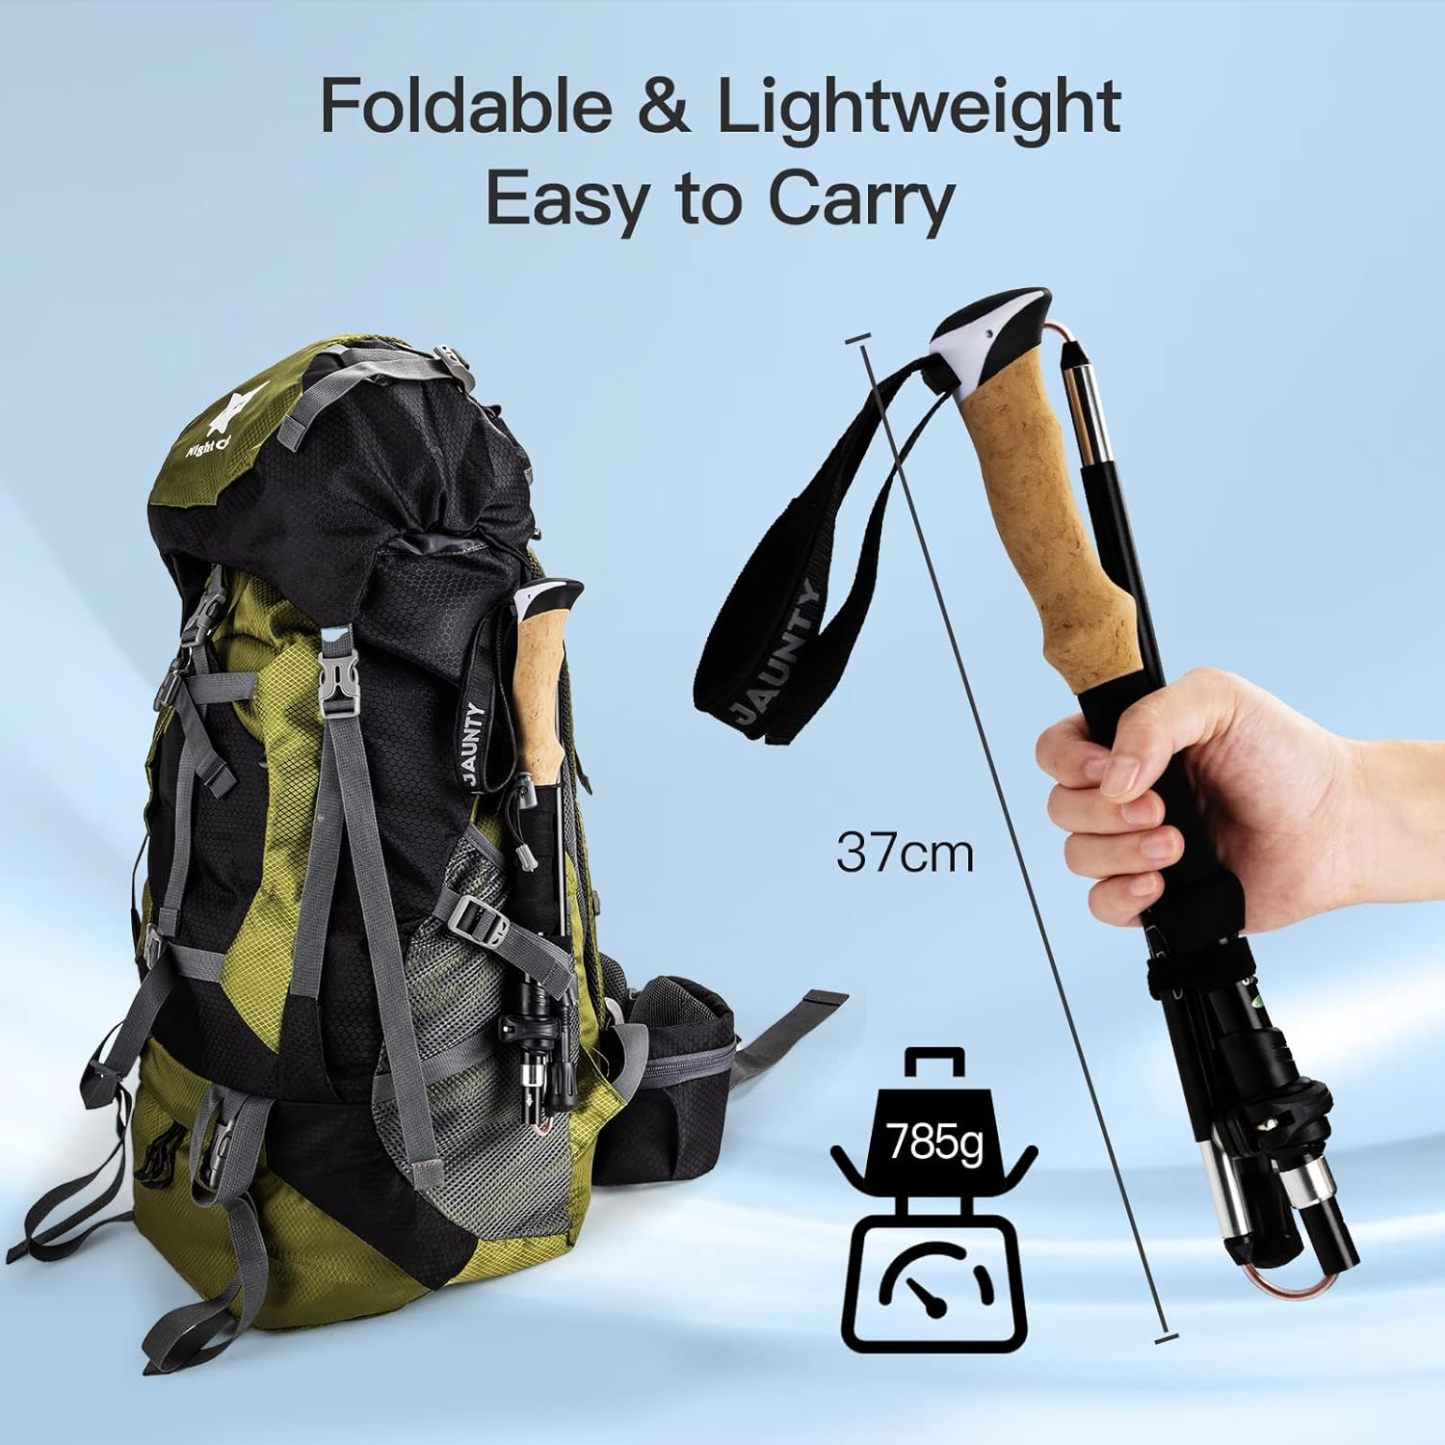 Night Cat Ultralight Tent with Collapsible Trekking Pole for Professional Backpacker Hiker 2 LBS Only Lanshan Backpacking Bivvy Ground Tent for 1 Person Heavy Rain Waterproof